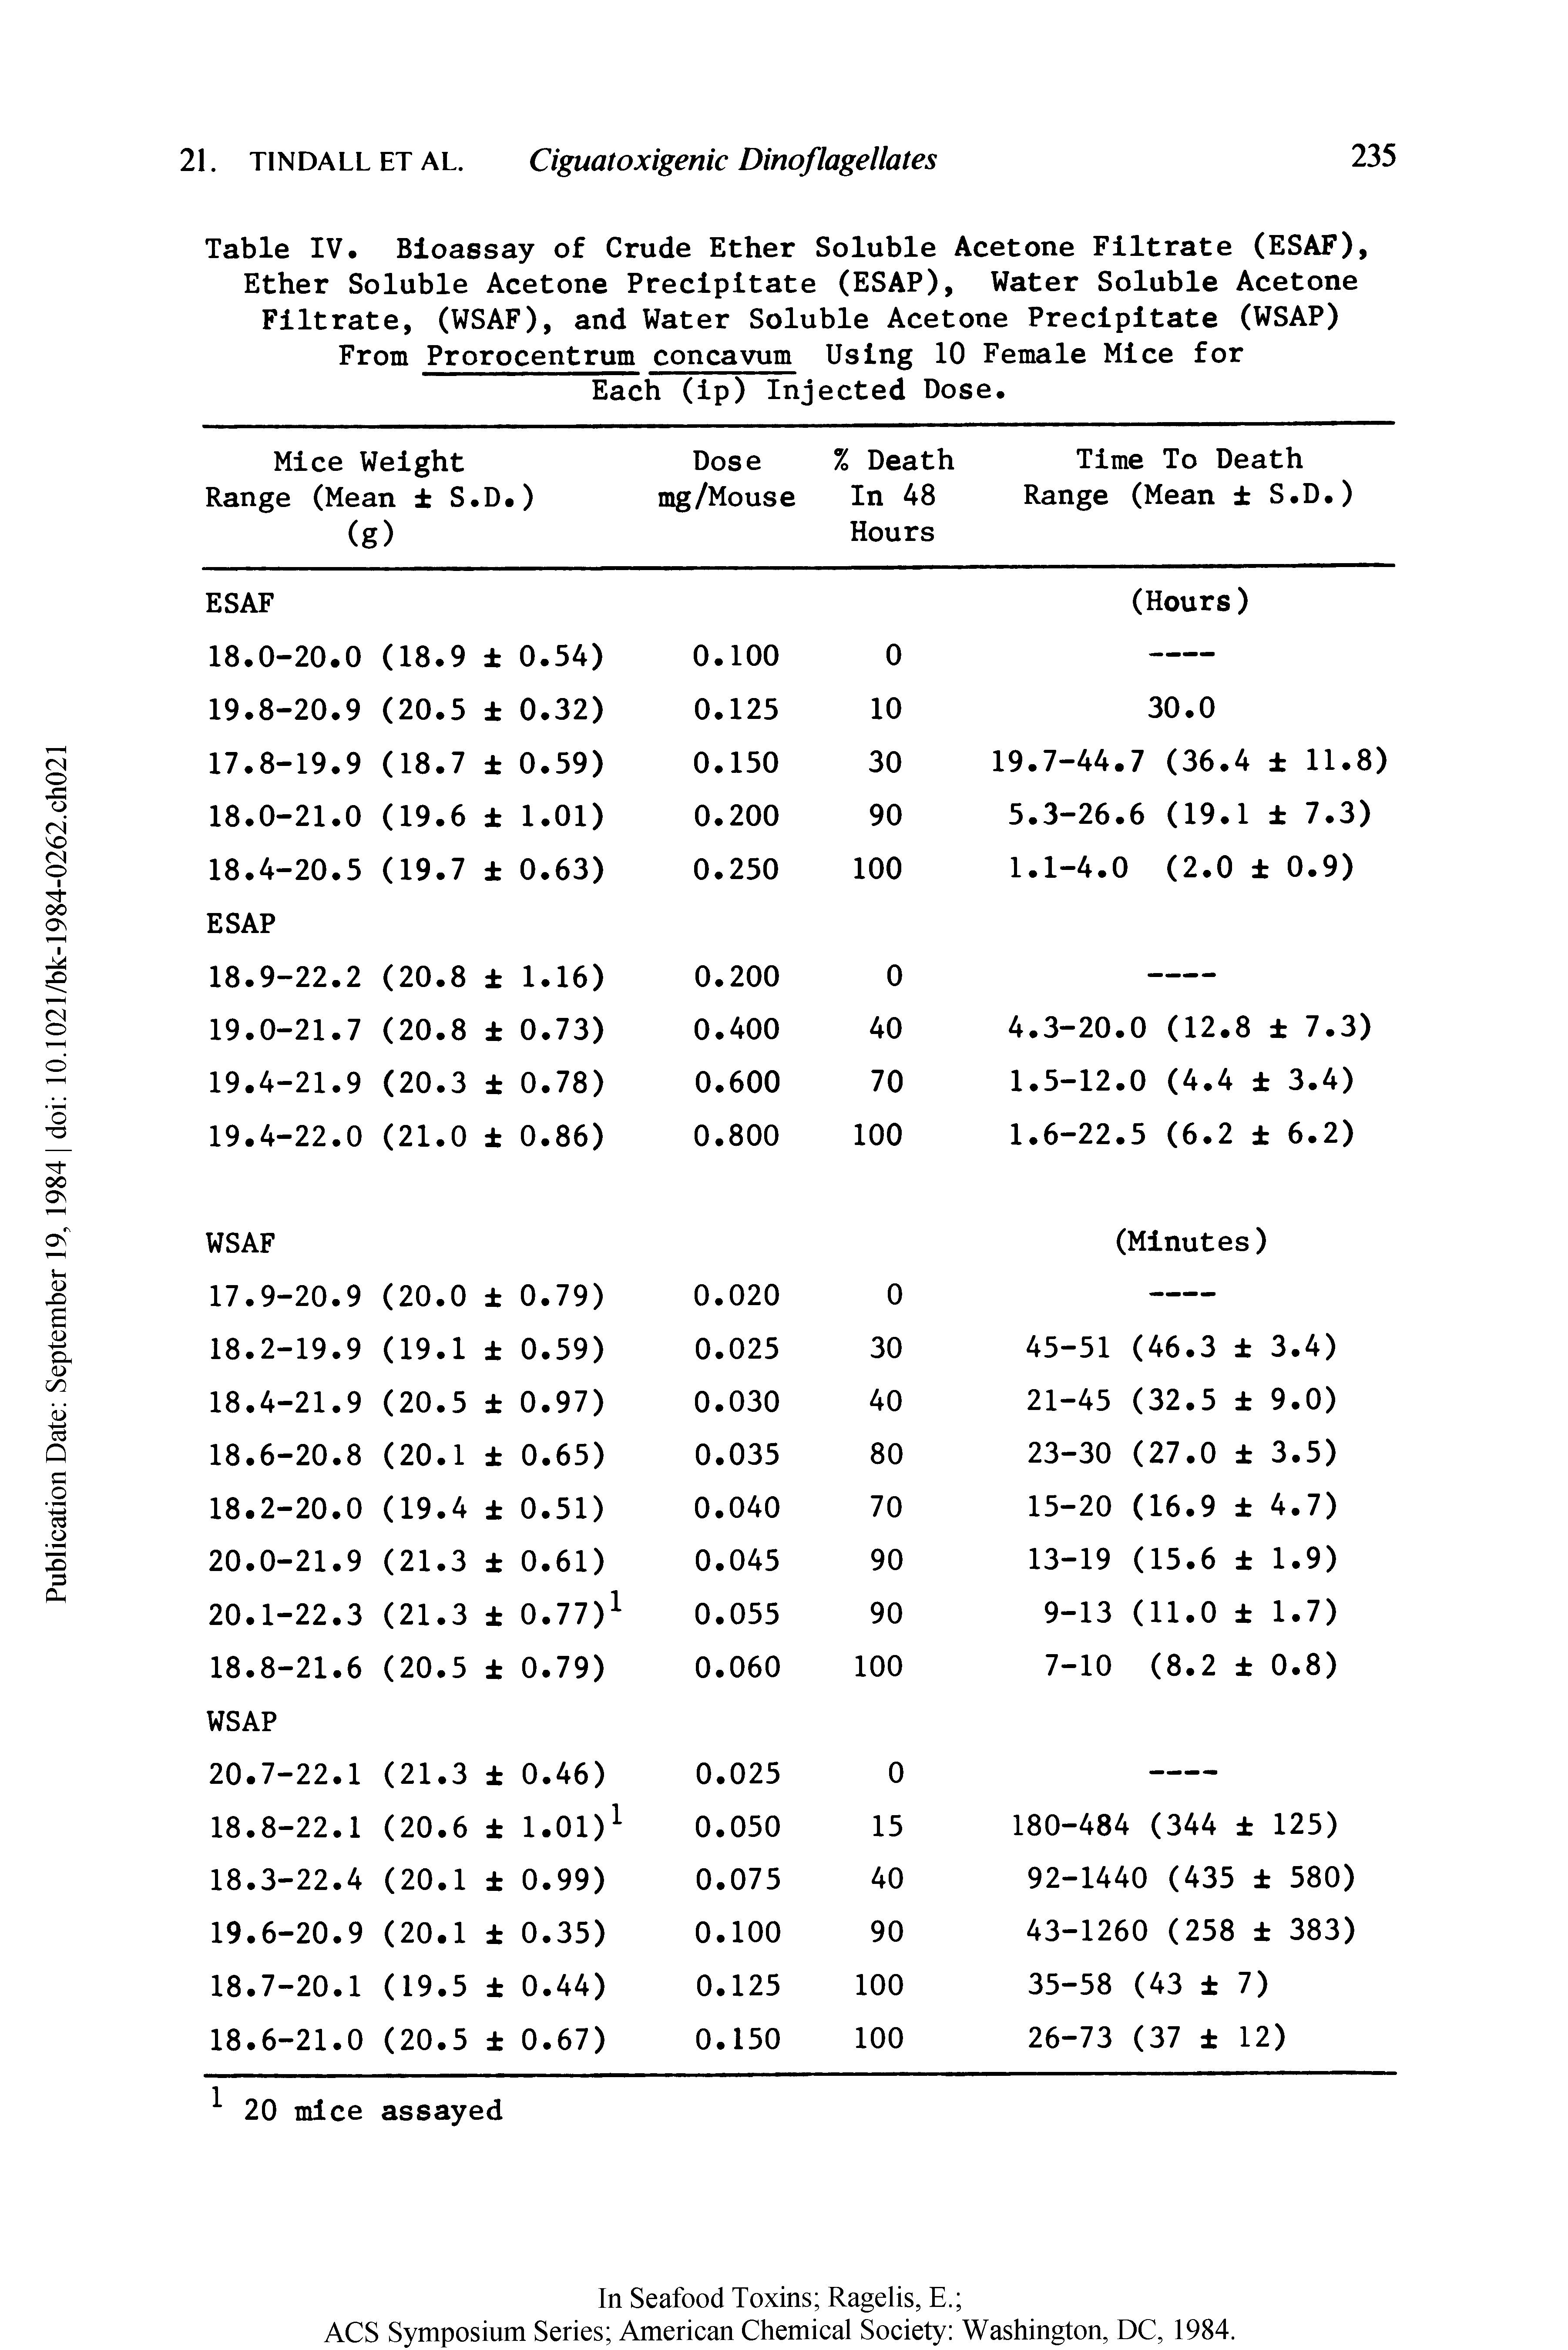 Table IV. Bioassay of Crude Ether Soluble Acetone Filtrate (ESAF), Ether Soluble Acetone Precipitate (ESAP), Water Soluble Acetone Filtrate, (WSAF), and Water Soluble Acetone Precipitate (WSAP) From Prorocentrum concavum Using 10 Female Mice for Each (ip) Injected Dose.